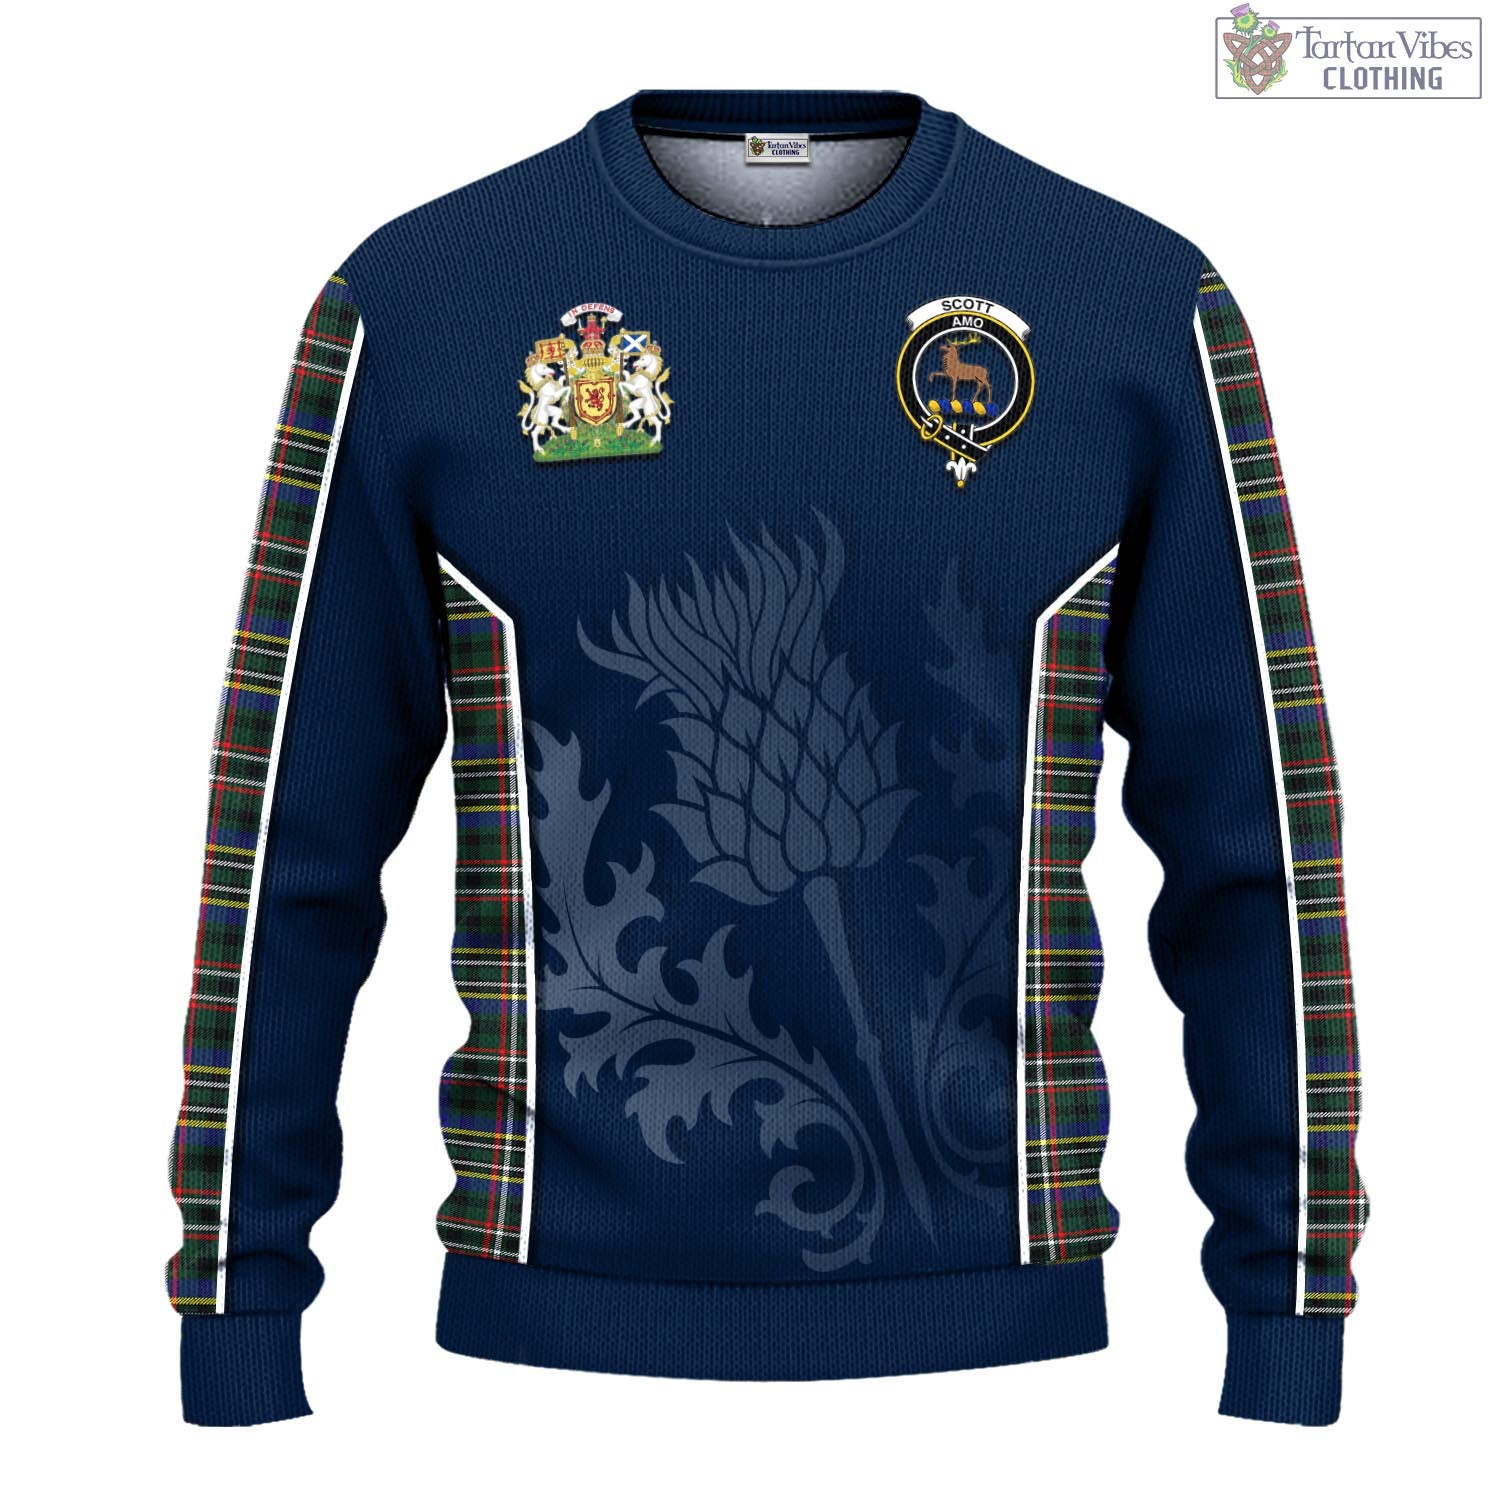 Tartan Vibes Clothing Scott Green Modern Tartan Knitted Sweatshirt with Family Crest and Scottish Thistle Vibes Sport Style